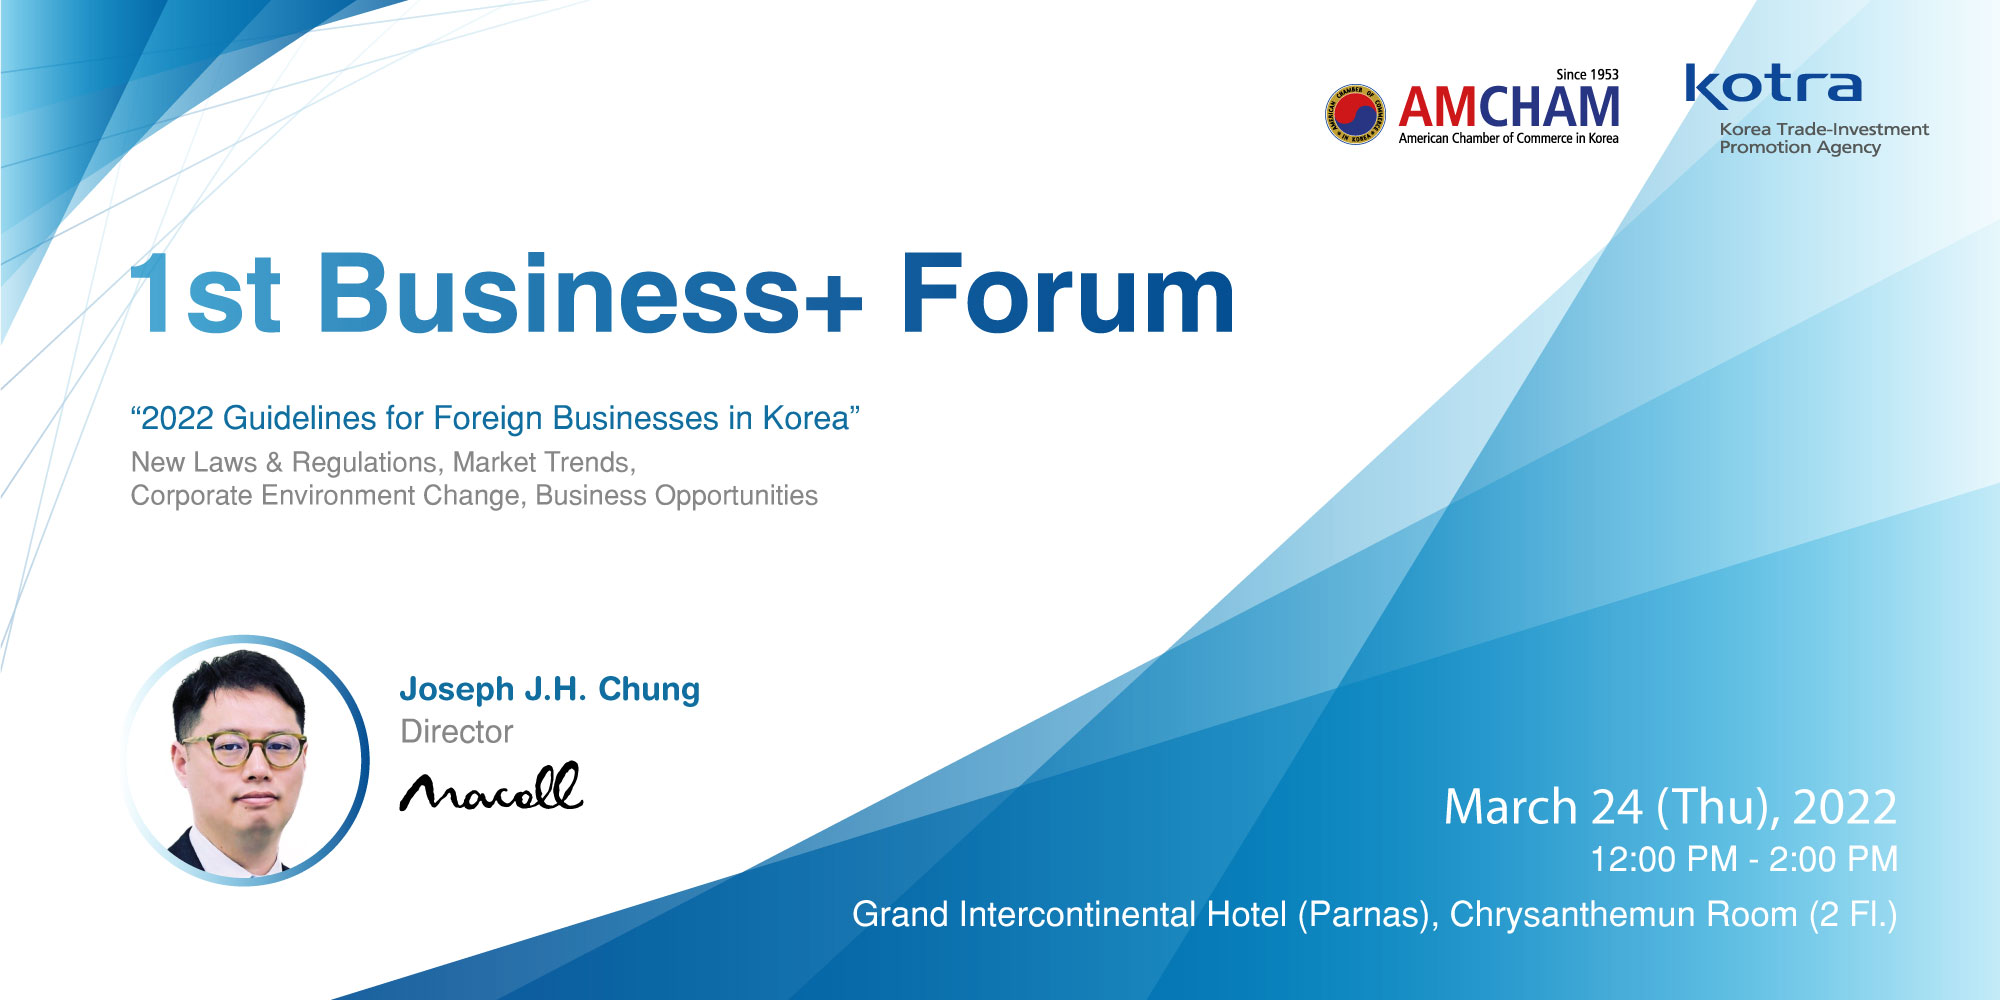 1st Business+ Forum co-hosted by AMCHAM and KOTRA